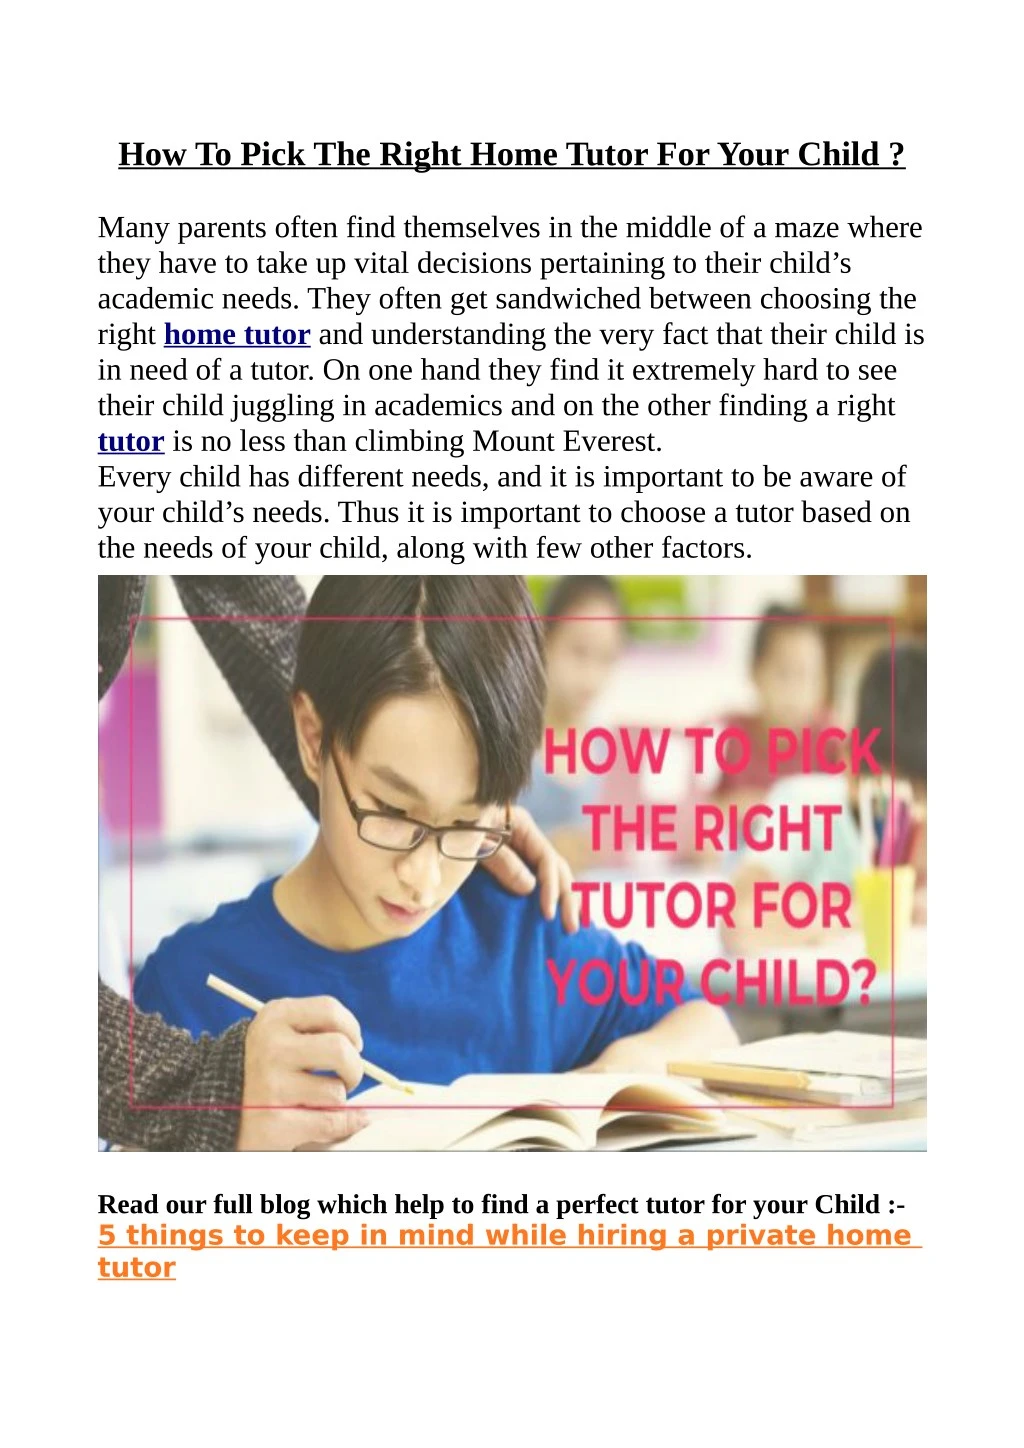 how to pick the right home tutor for your child